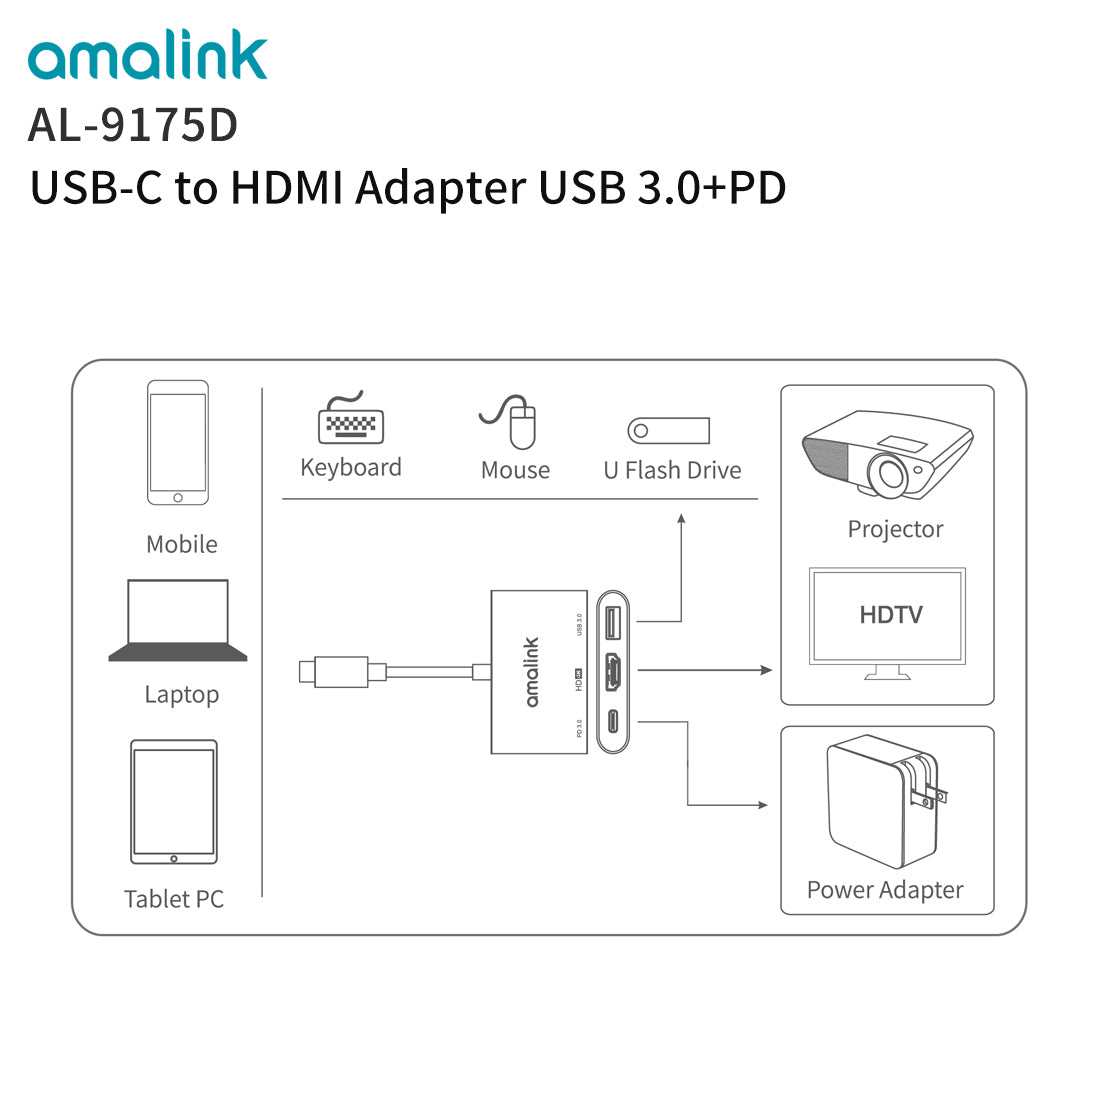 3 in 1 USB 3.0 Hub For Laptop Adapter PD Charge 3 Ports Dock Station HDMI Notebook Type-C Splitter (9175D)